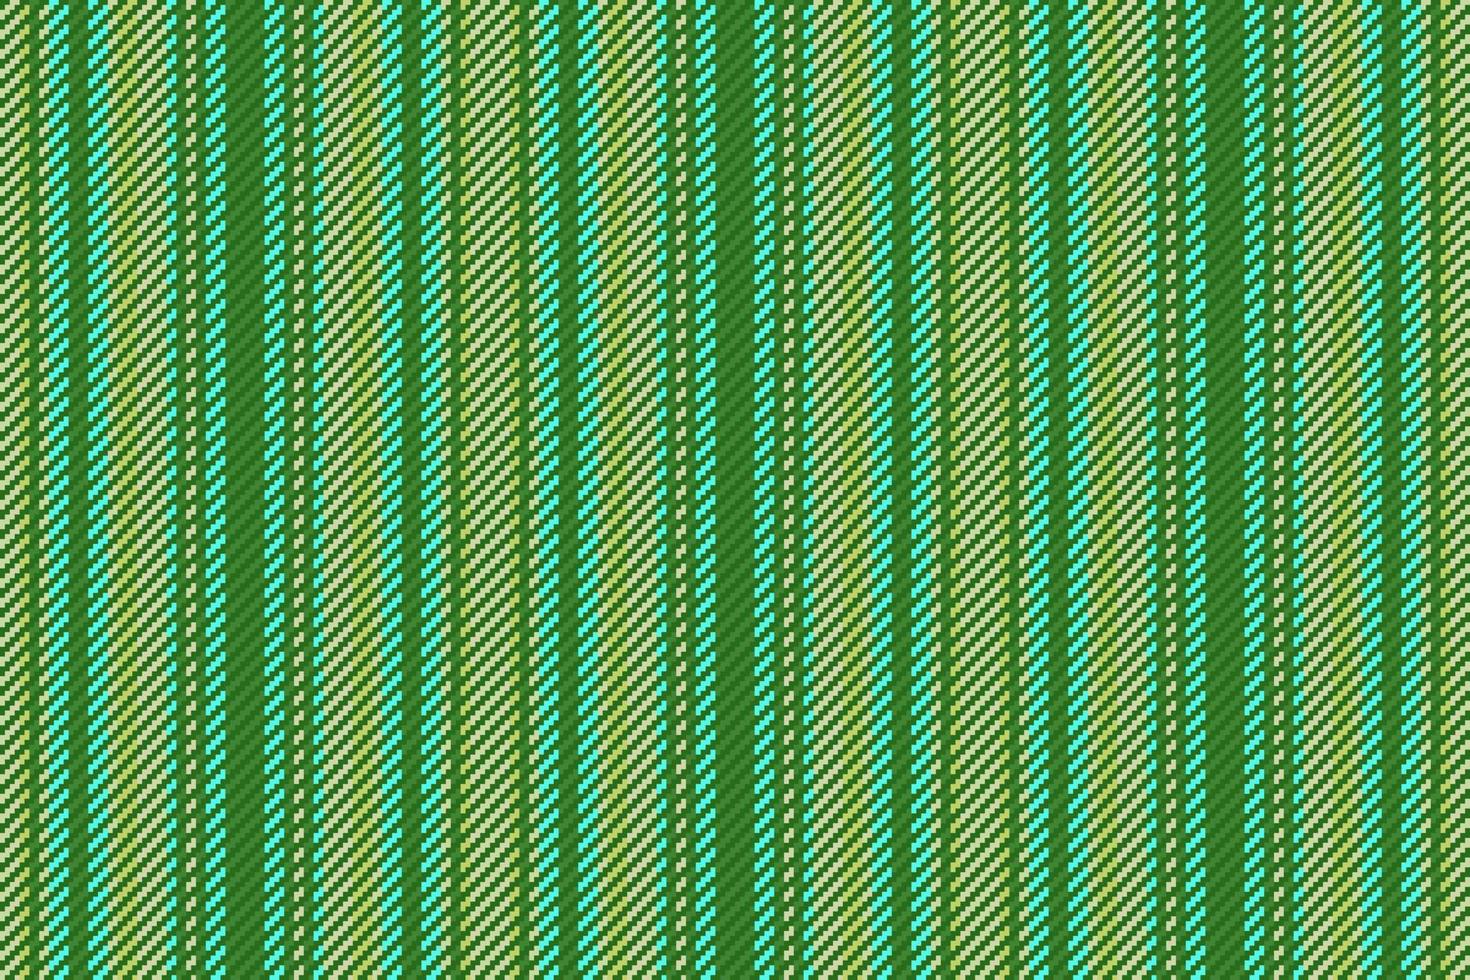 Background lines vertical. Pattern texture textile. Fabric vector seamless stripe.